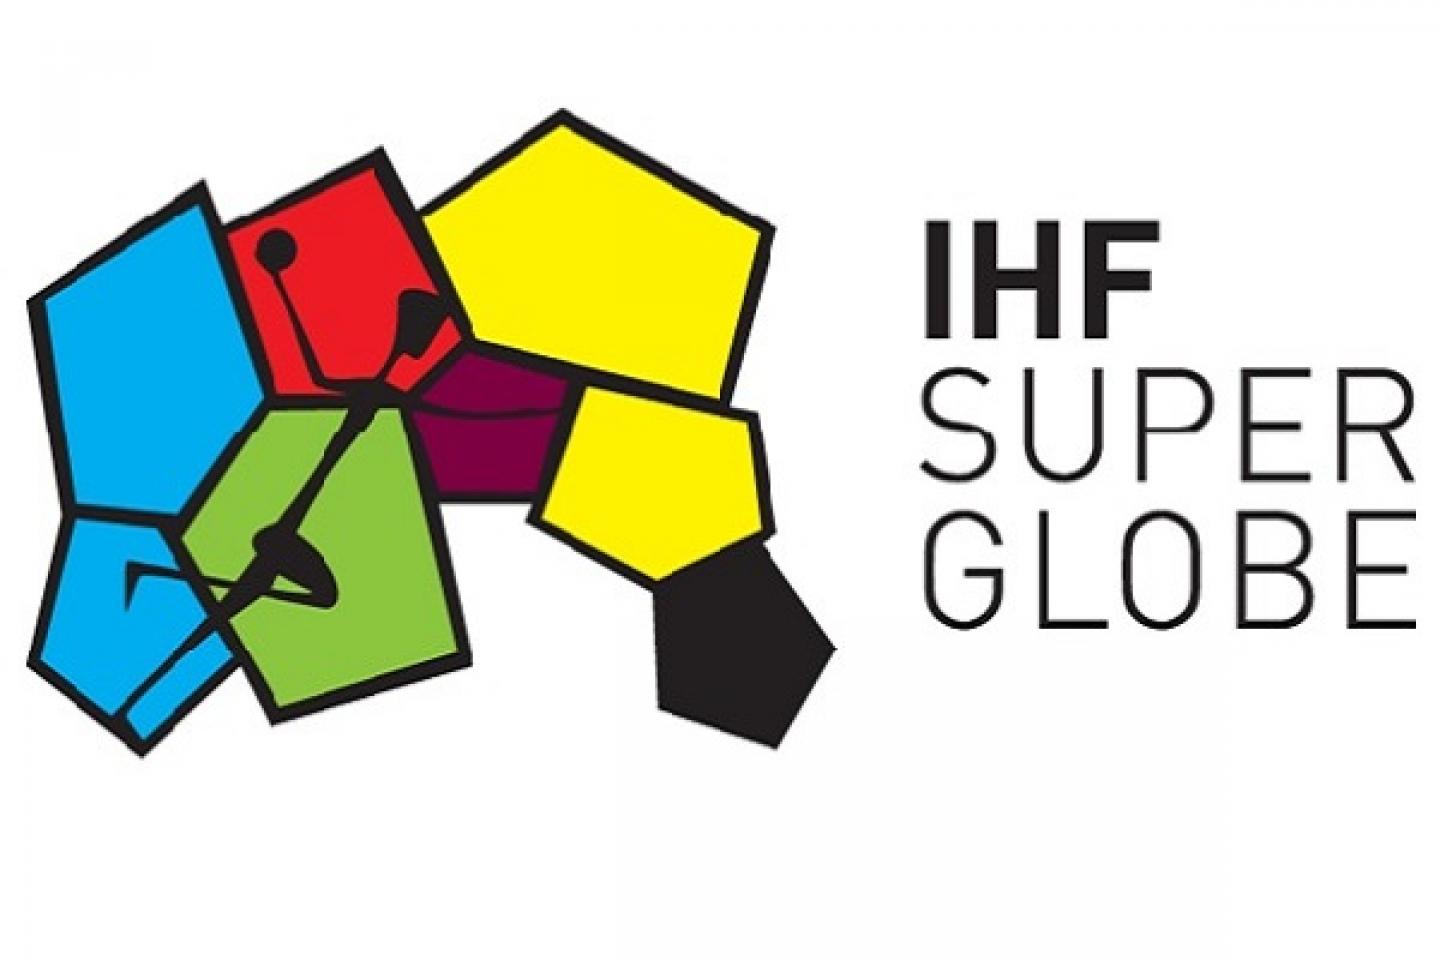 Accreditation for 2015 IHF Super Globe launched